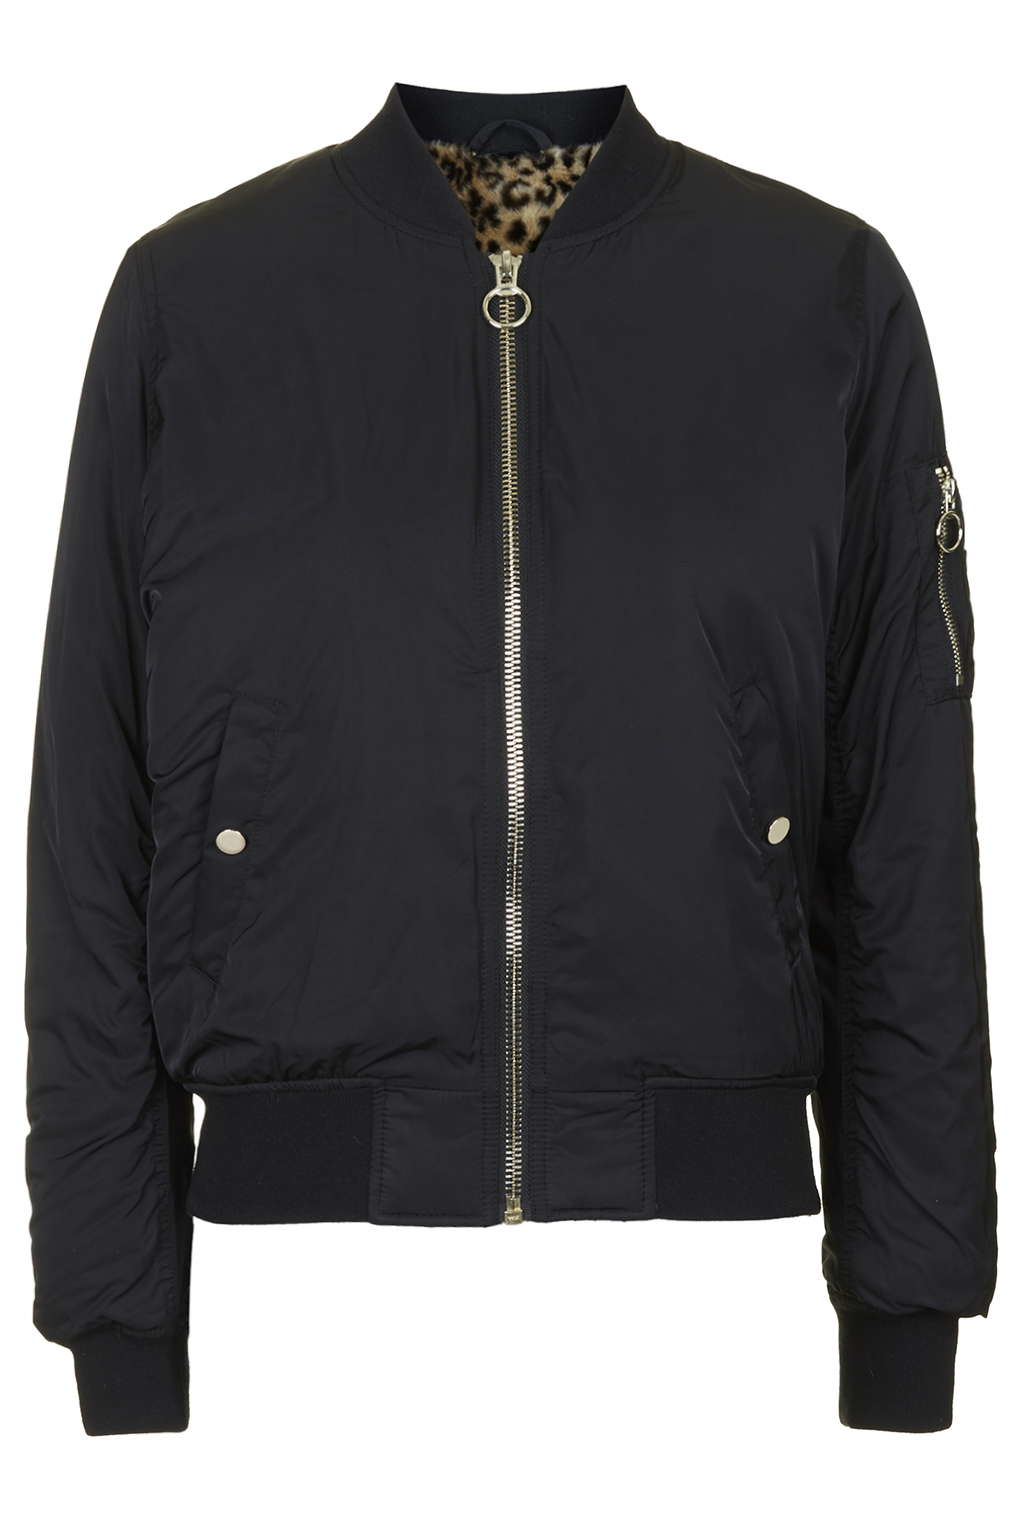 Lyst - Topshop Petite Faux Fur Lined Bomber Jacket in Black